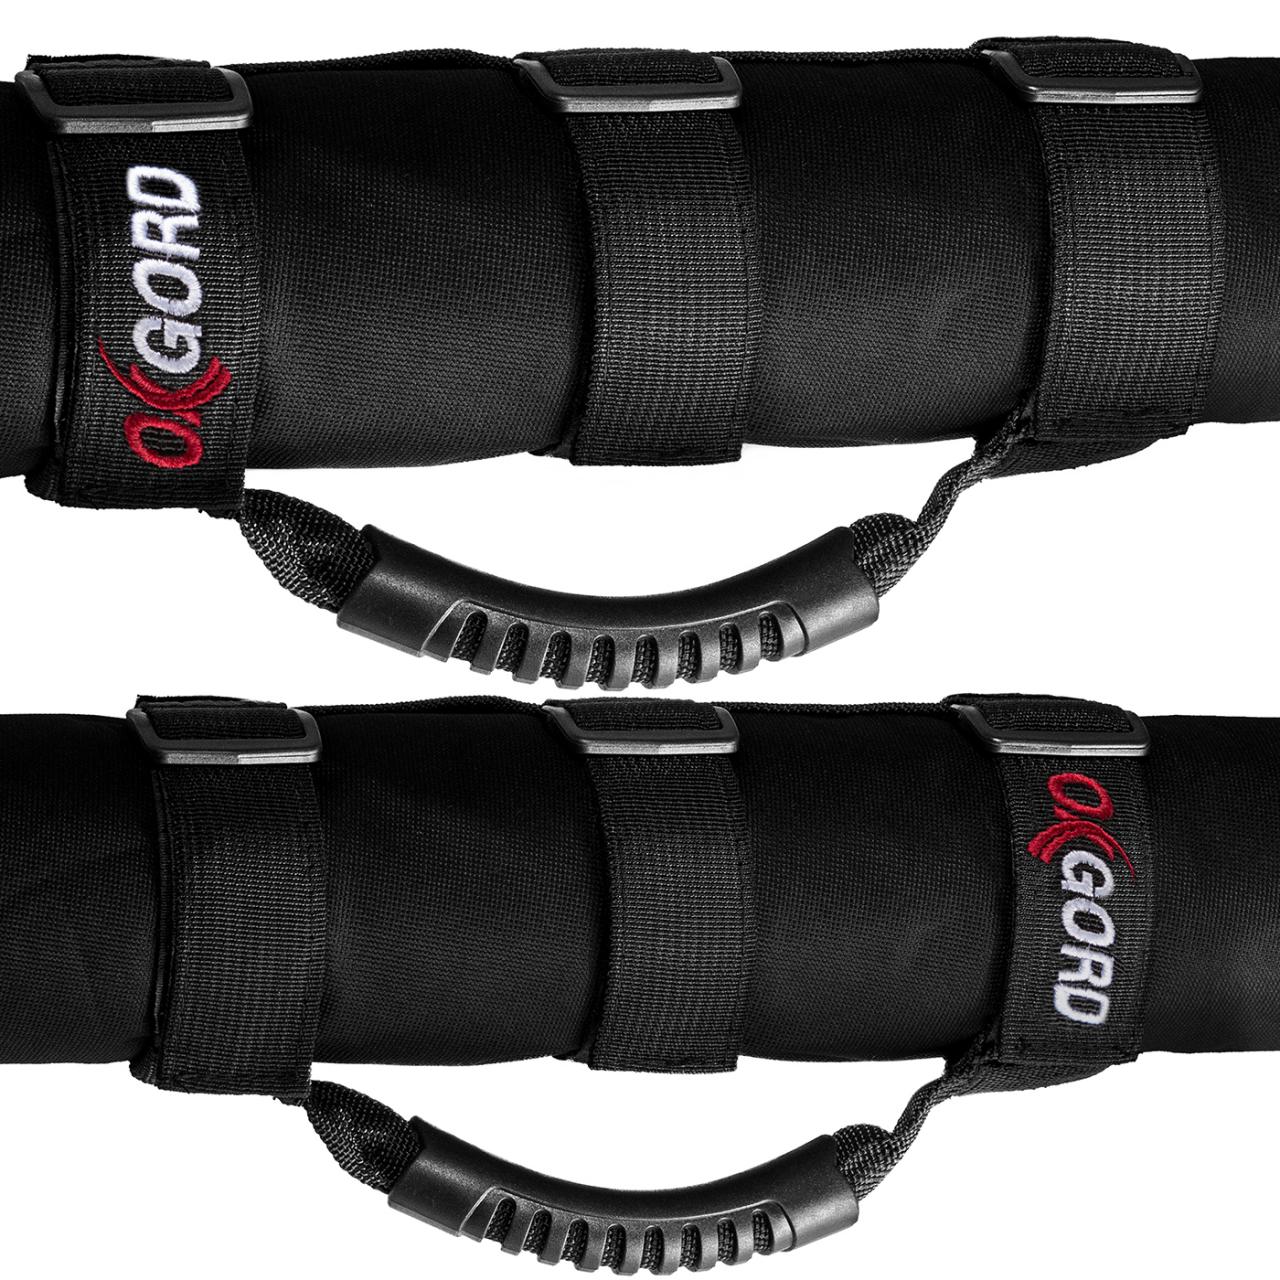 OxGord Roll Bar Grab Handle Set for Jeep, UTV & ATV Gear (Pack of 2) Fits 1  1/2 to 3 Inch Roll Bars, Body - Amazon Canada